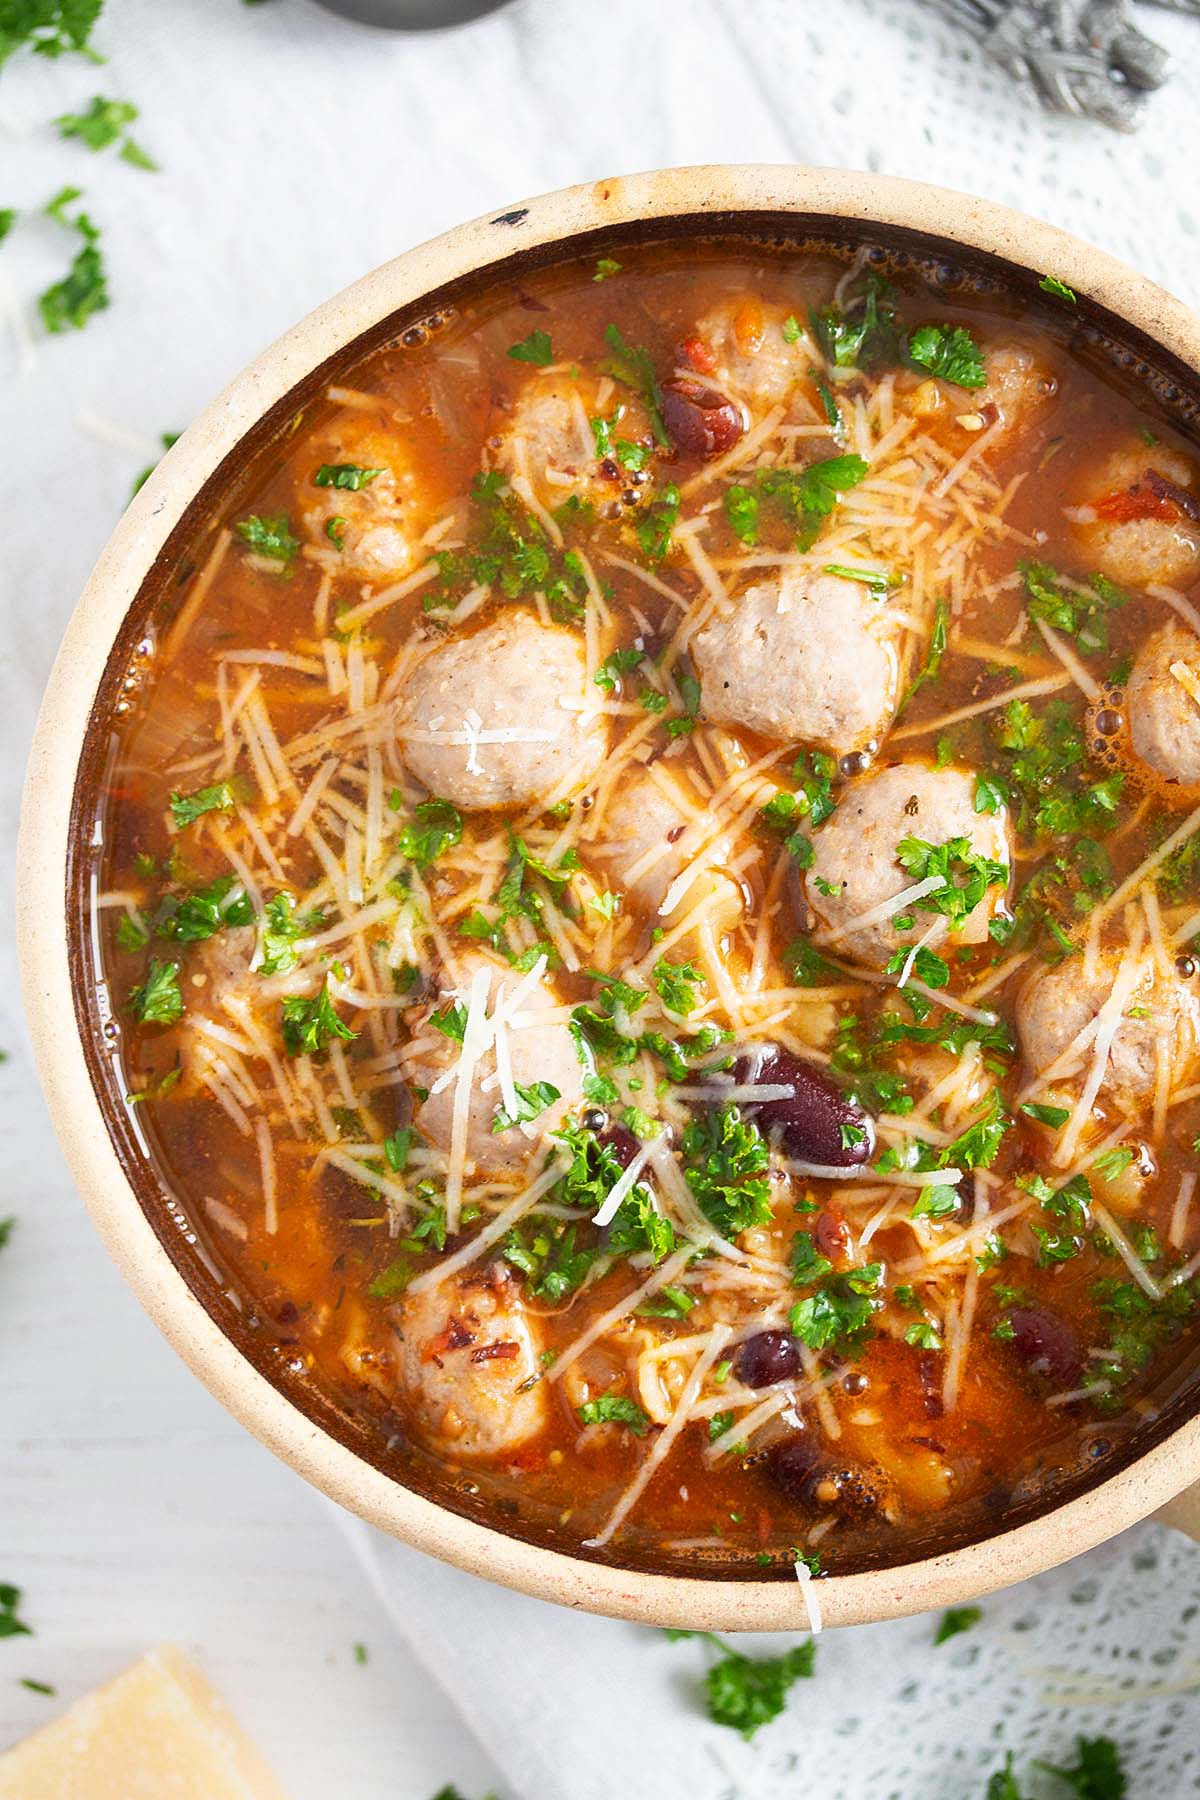 a bowl full of soup with brat meatballs and beans.